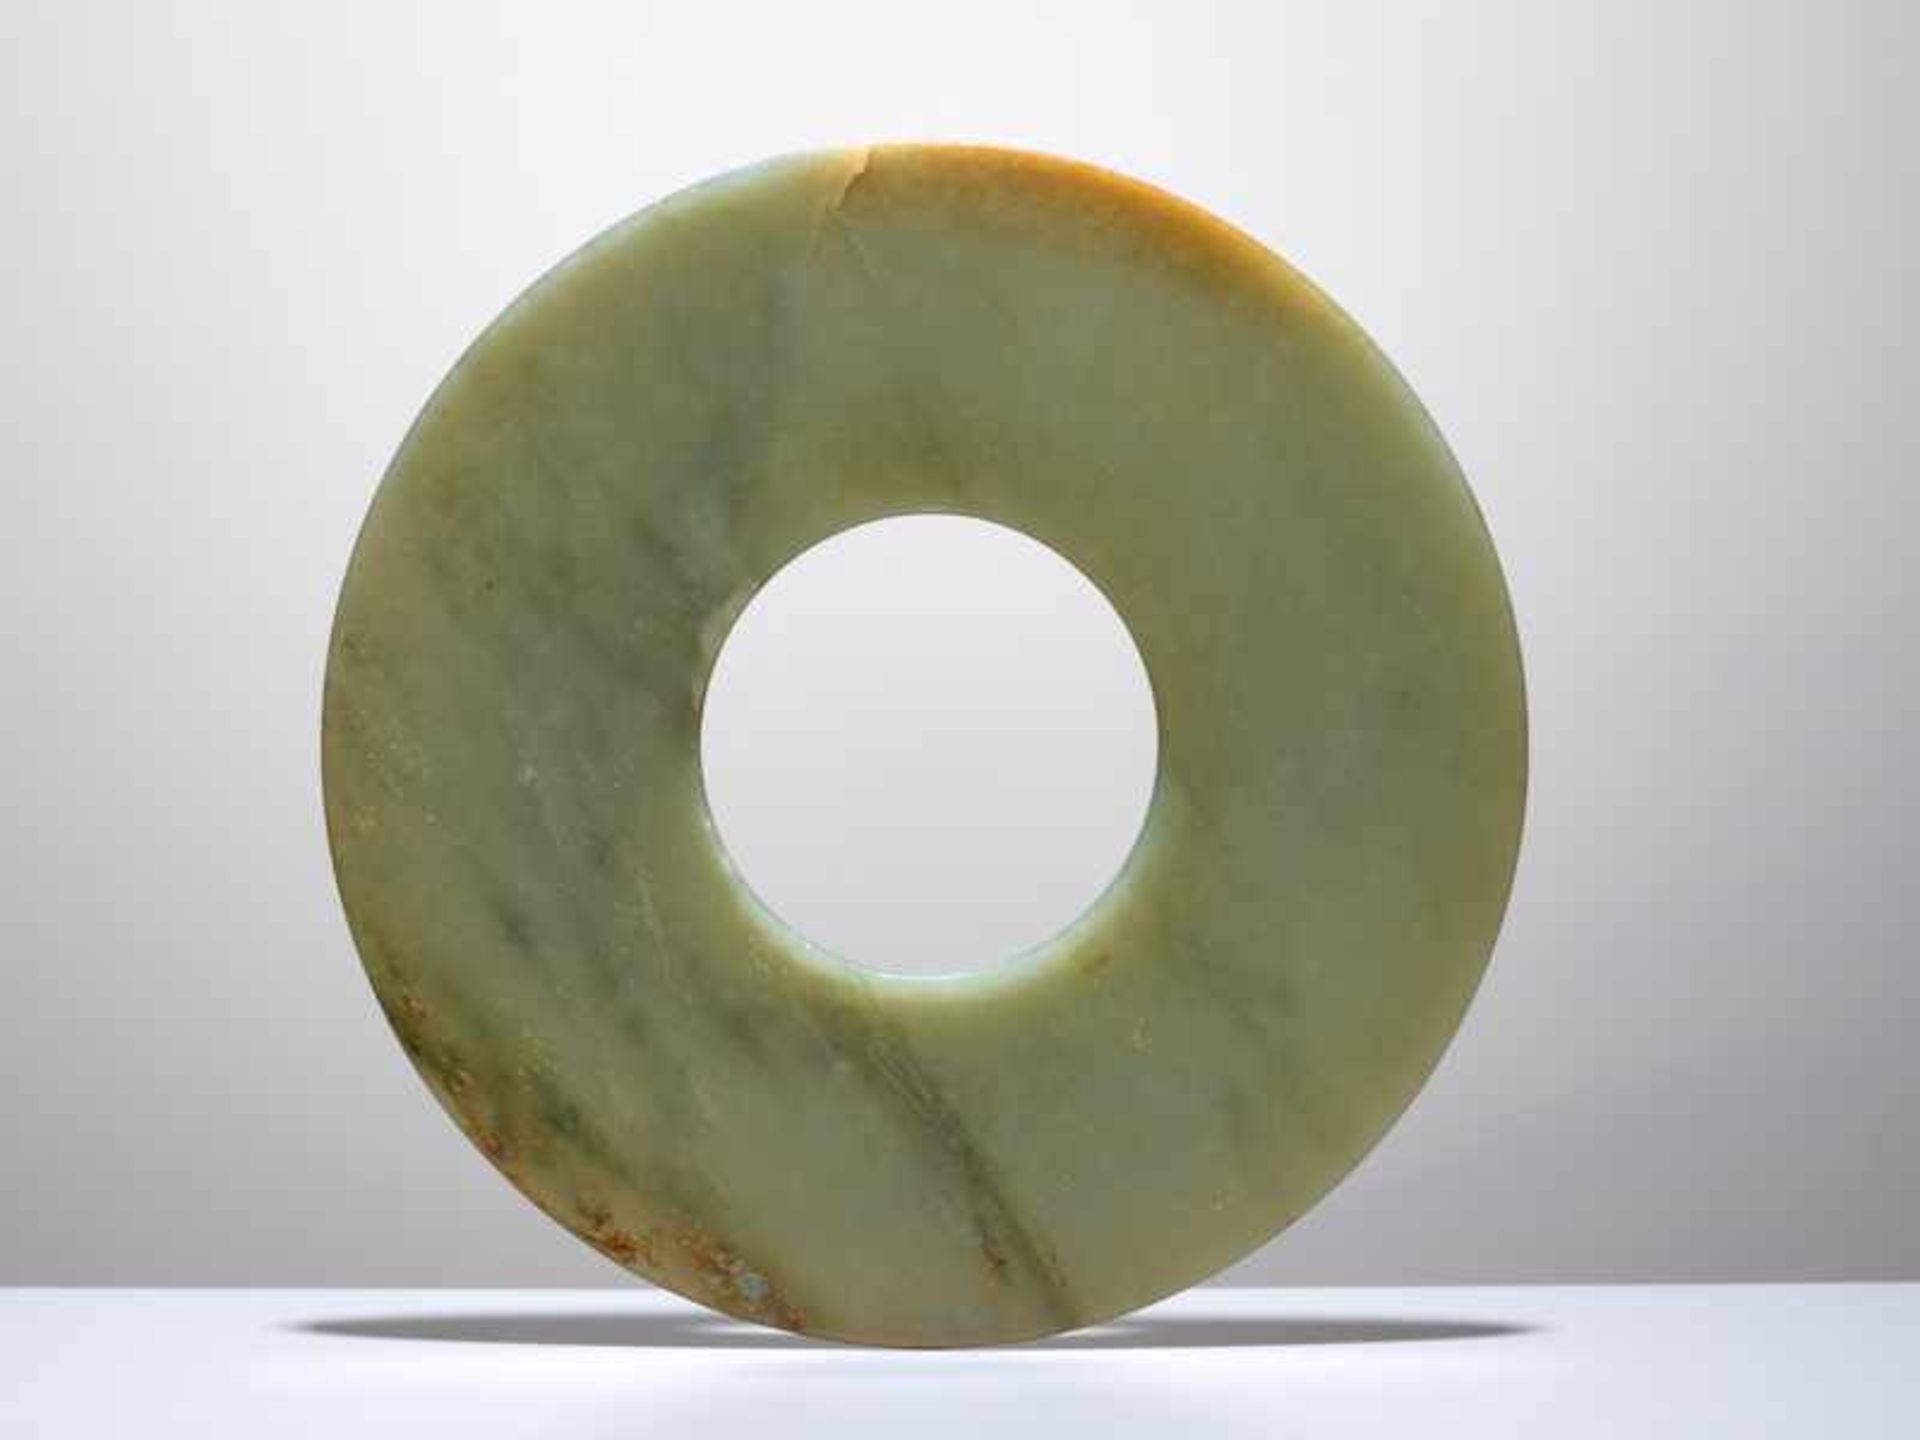 A SMOOTHLY POLISHED BI DISC WITH SHINY SURFACES CARVED FROM GREEN JADE WITH BROWN STRIPES Jade. - Image 2 of 4